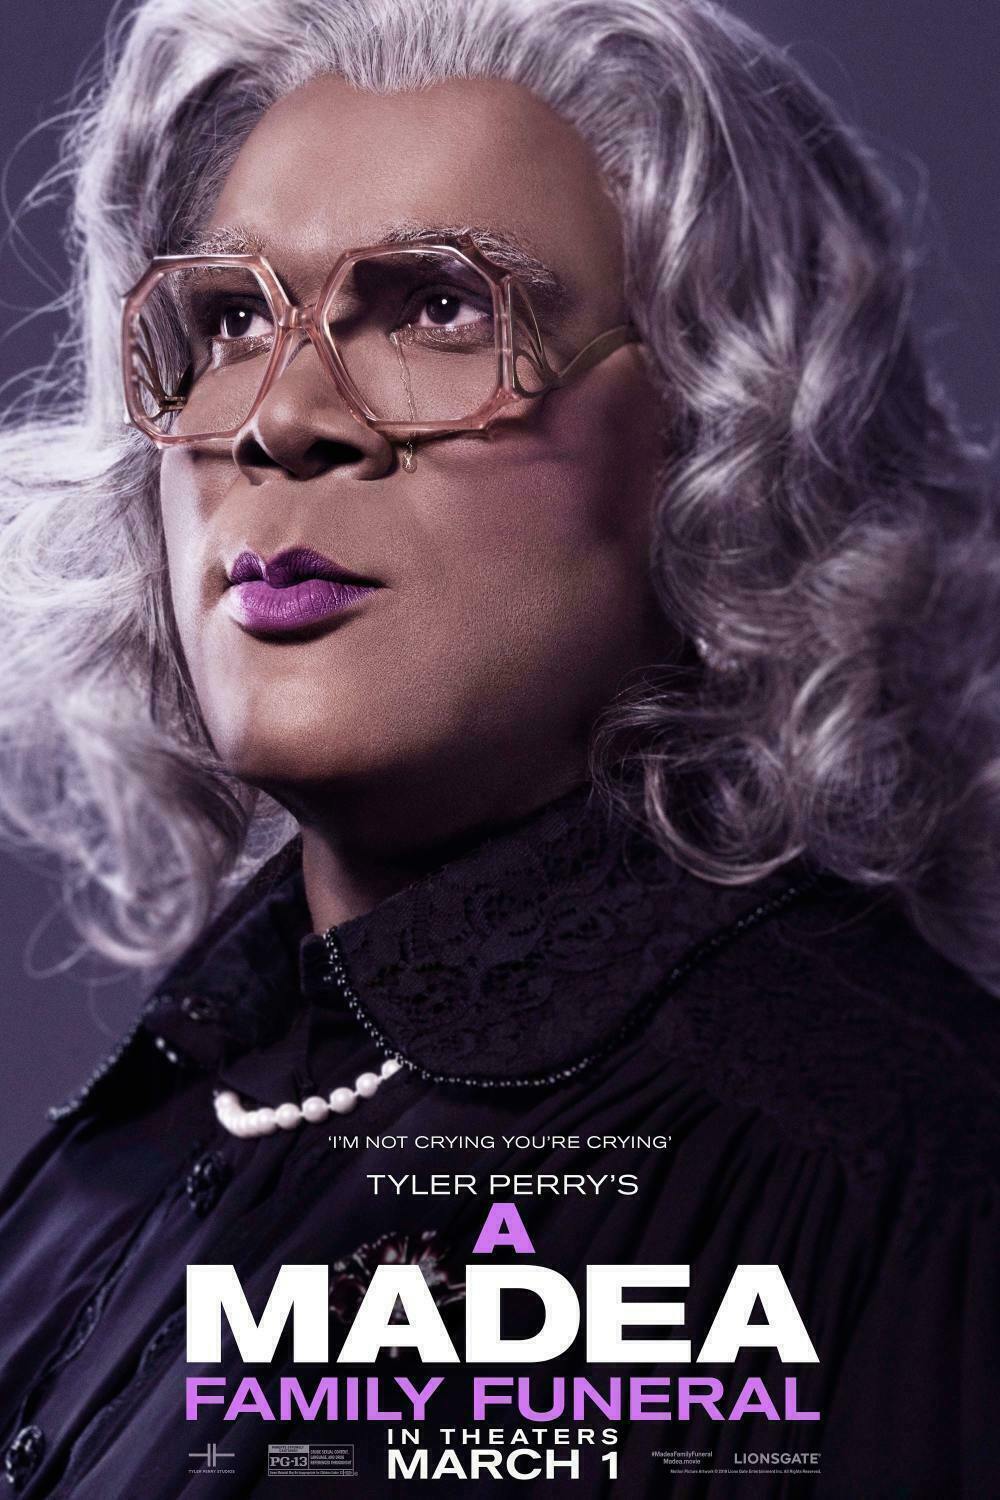 281124-tyler-perry-s-a-madea-family-funeral-movie-tyler-perry-poster